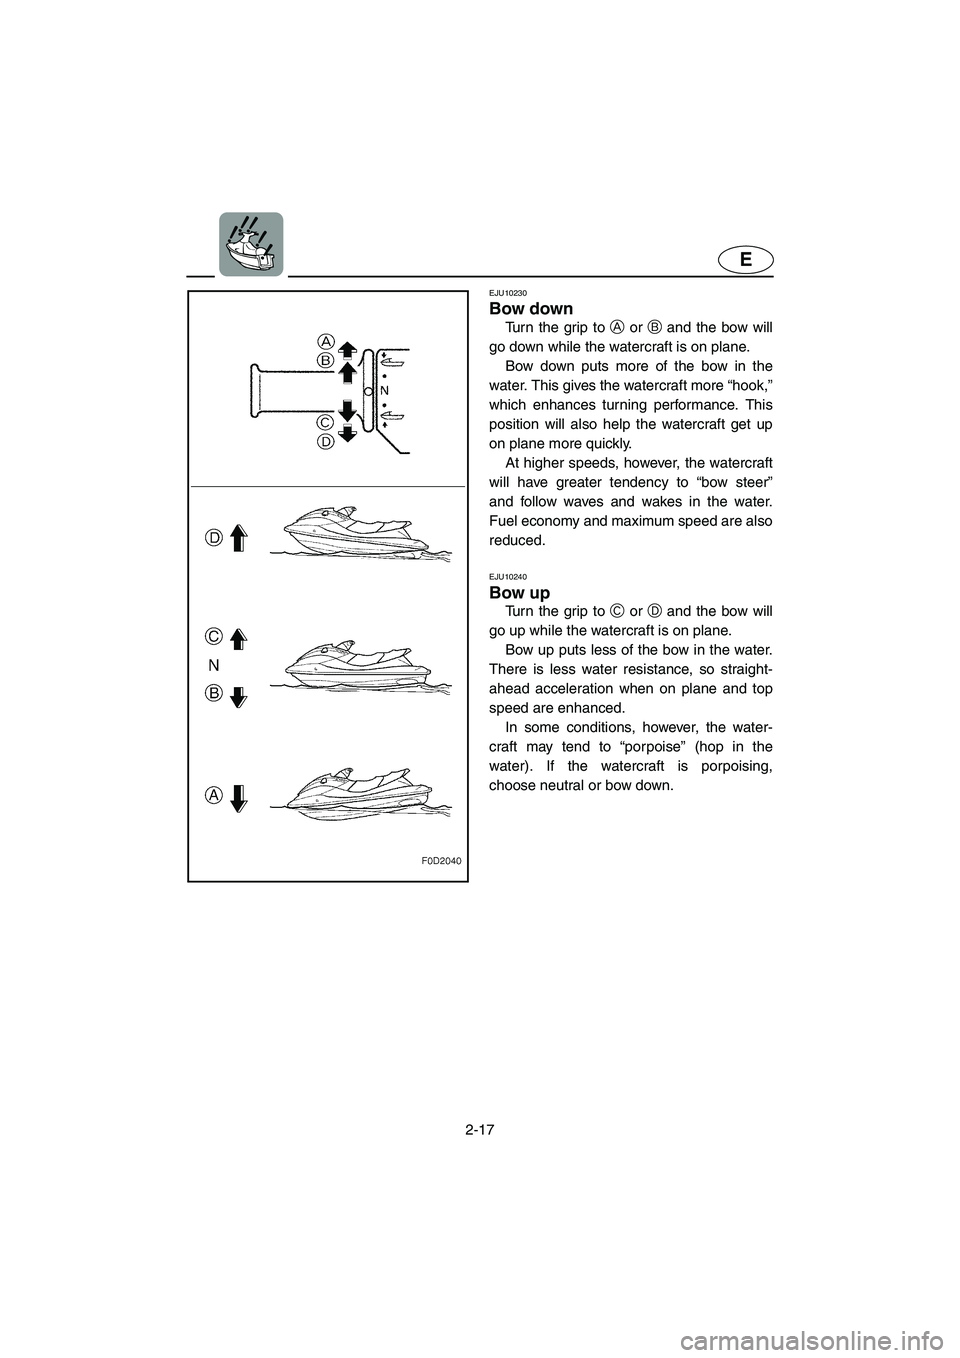 YAMAHA FX HO 2006 Service Manual 2-17
E
EJU10230 
Bow down  
Turn the grip to A or B and the bow will
go down while the watercraft is on plane. 
Bow down puts more of the bow in the
water. This gives the watercraft more “hook,”
w